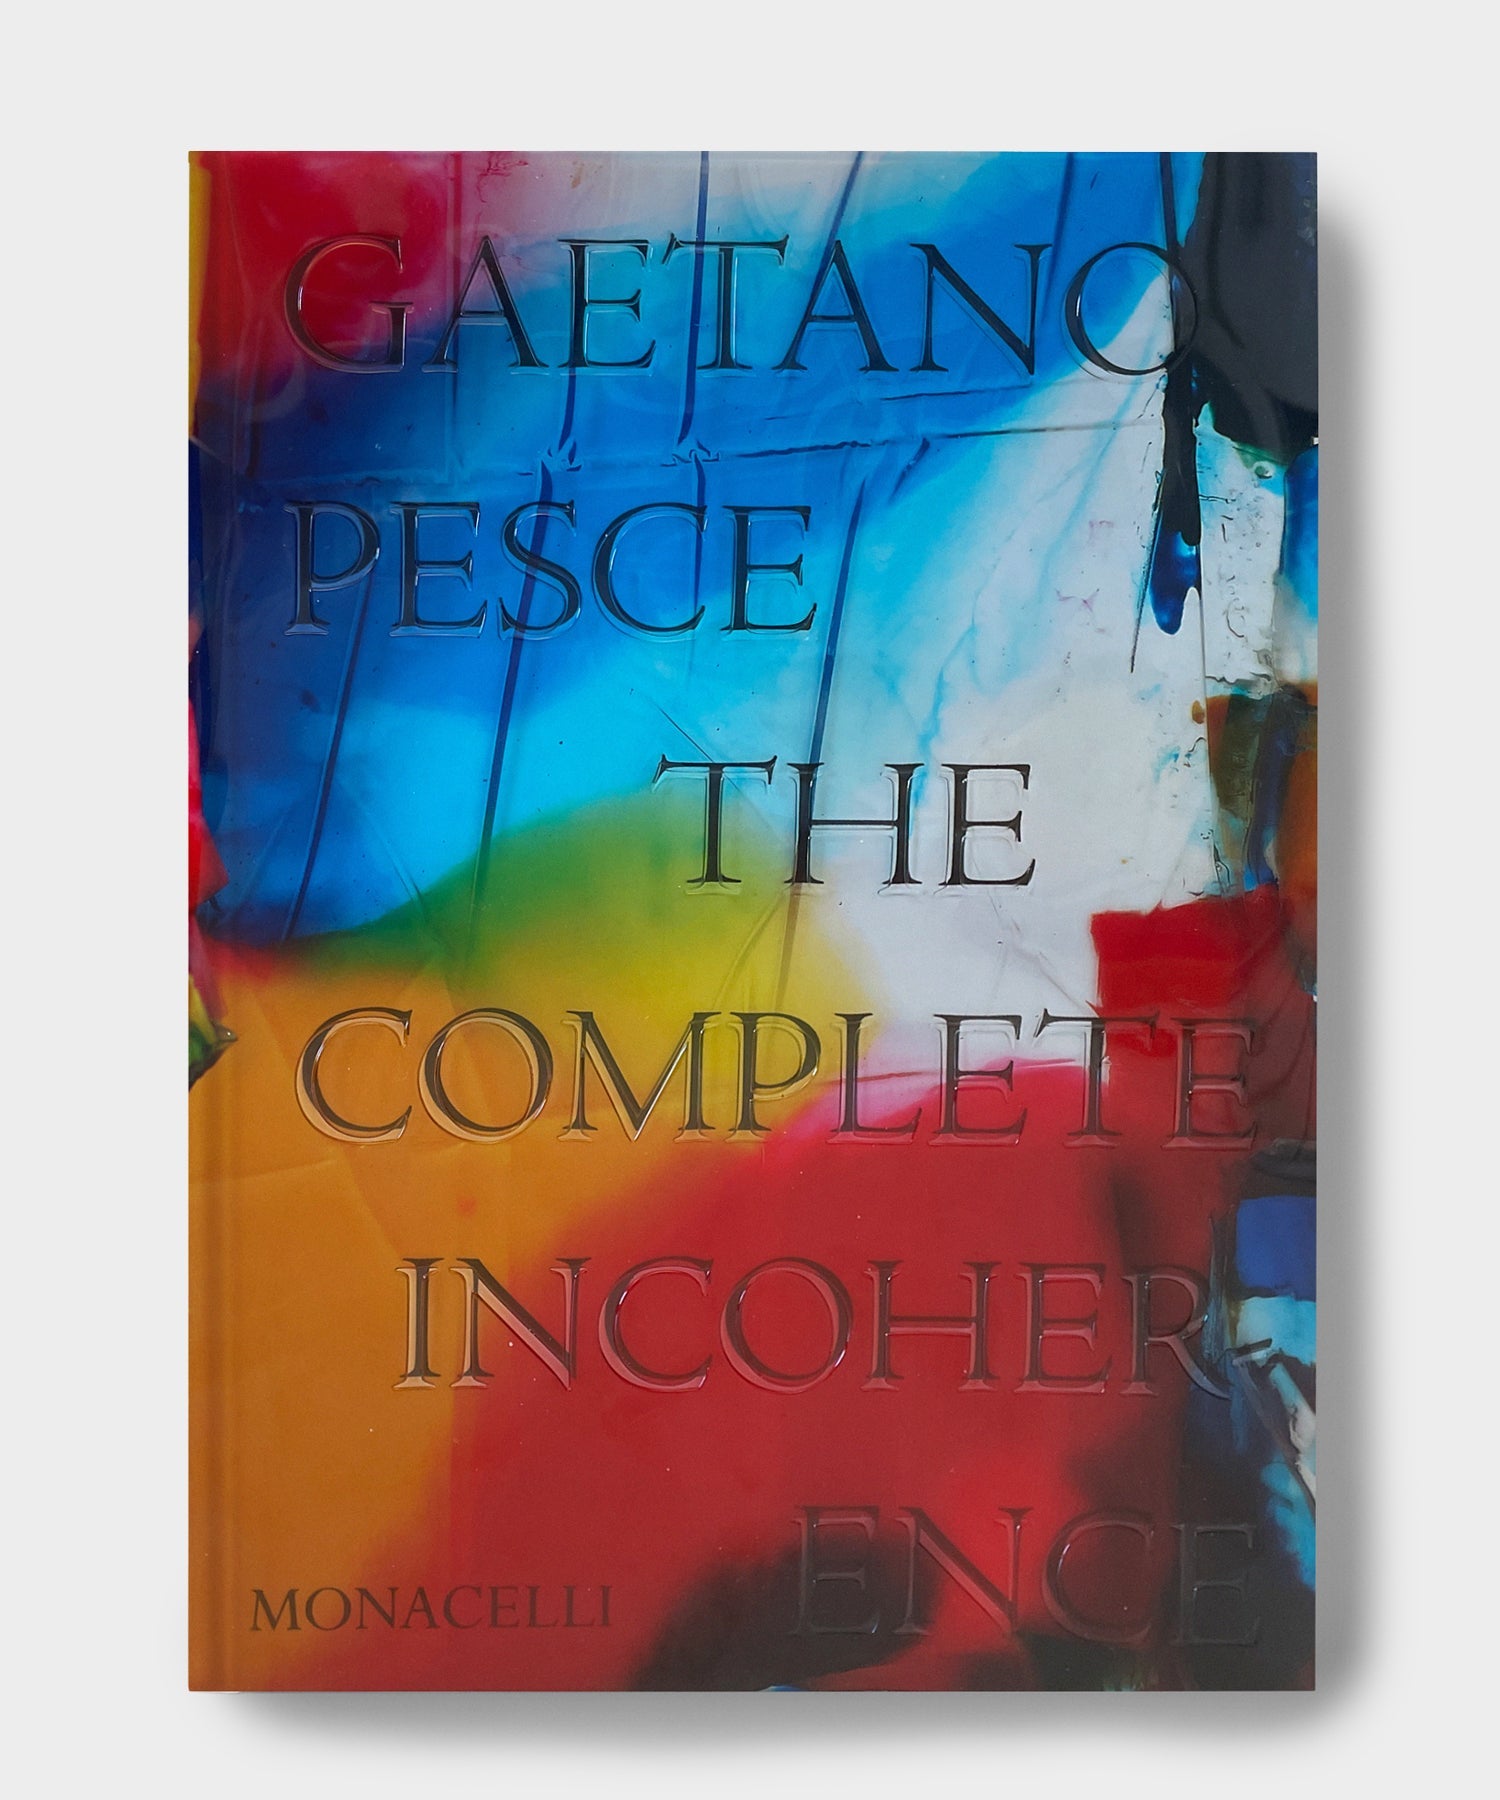 PHAIDON "GAETANO PESCE: THE COMPLETE INCOHERENCE"